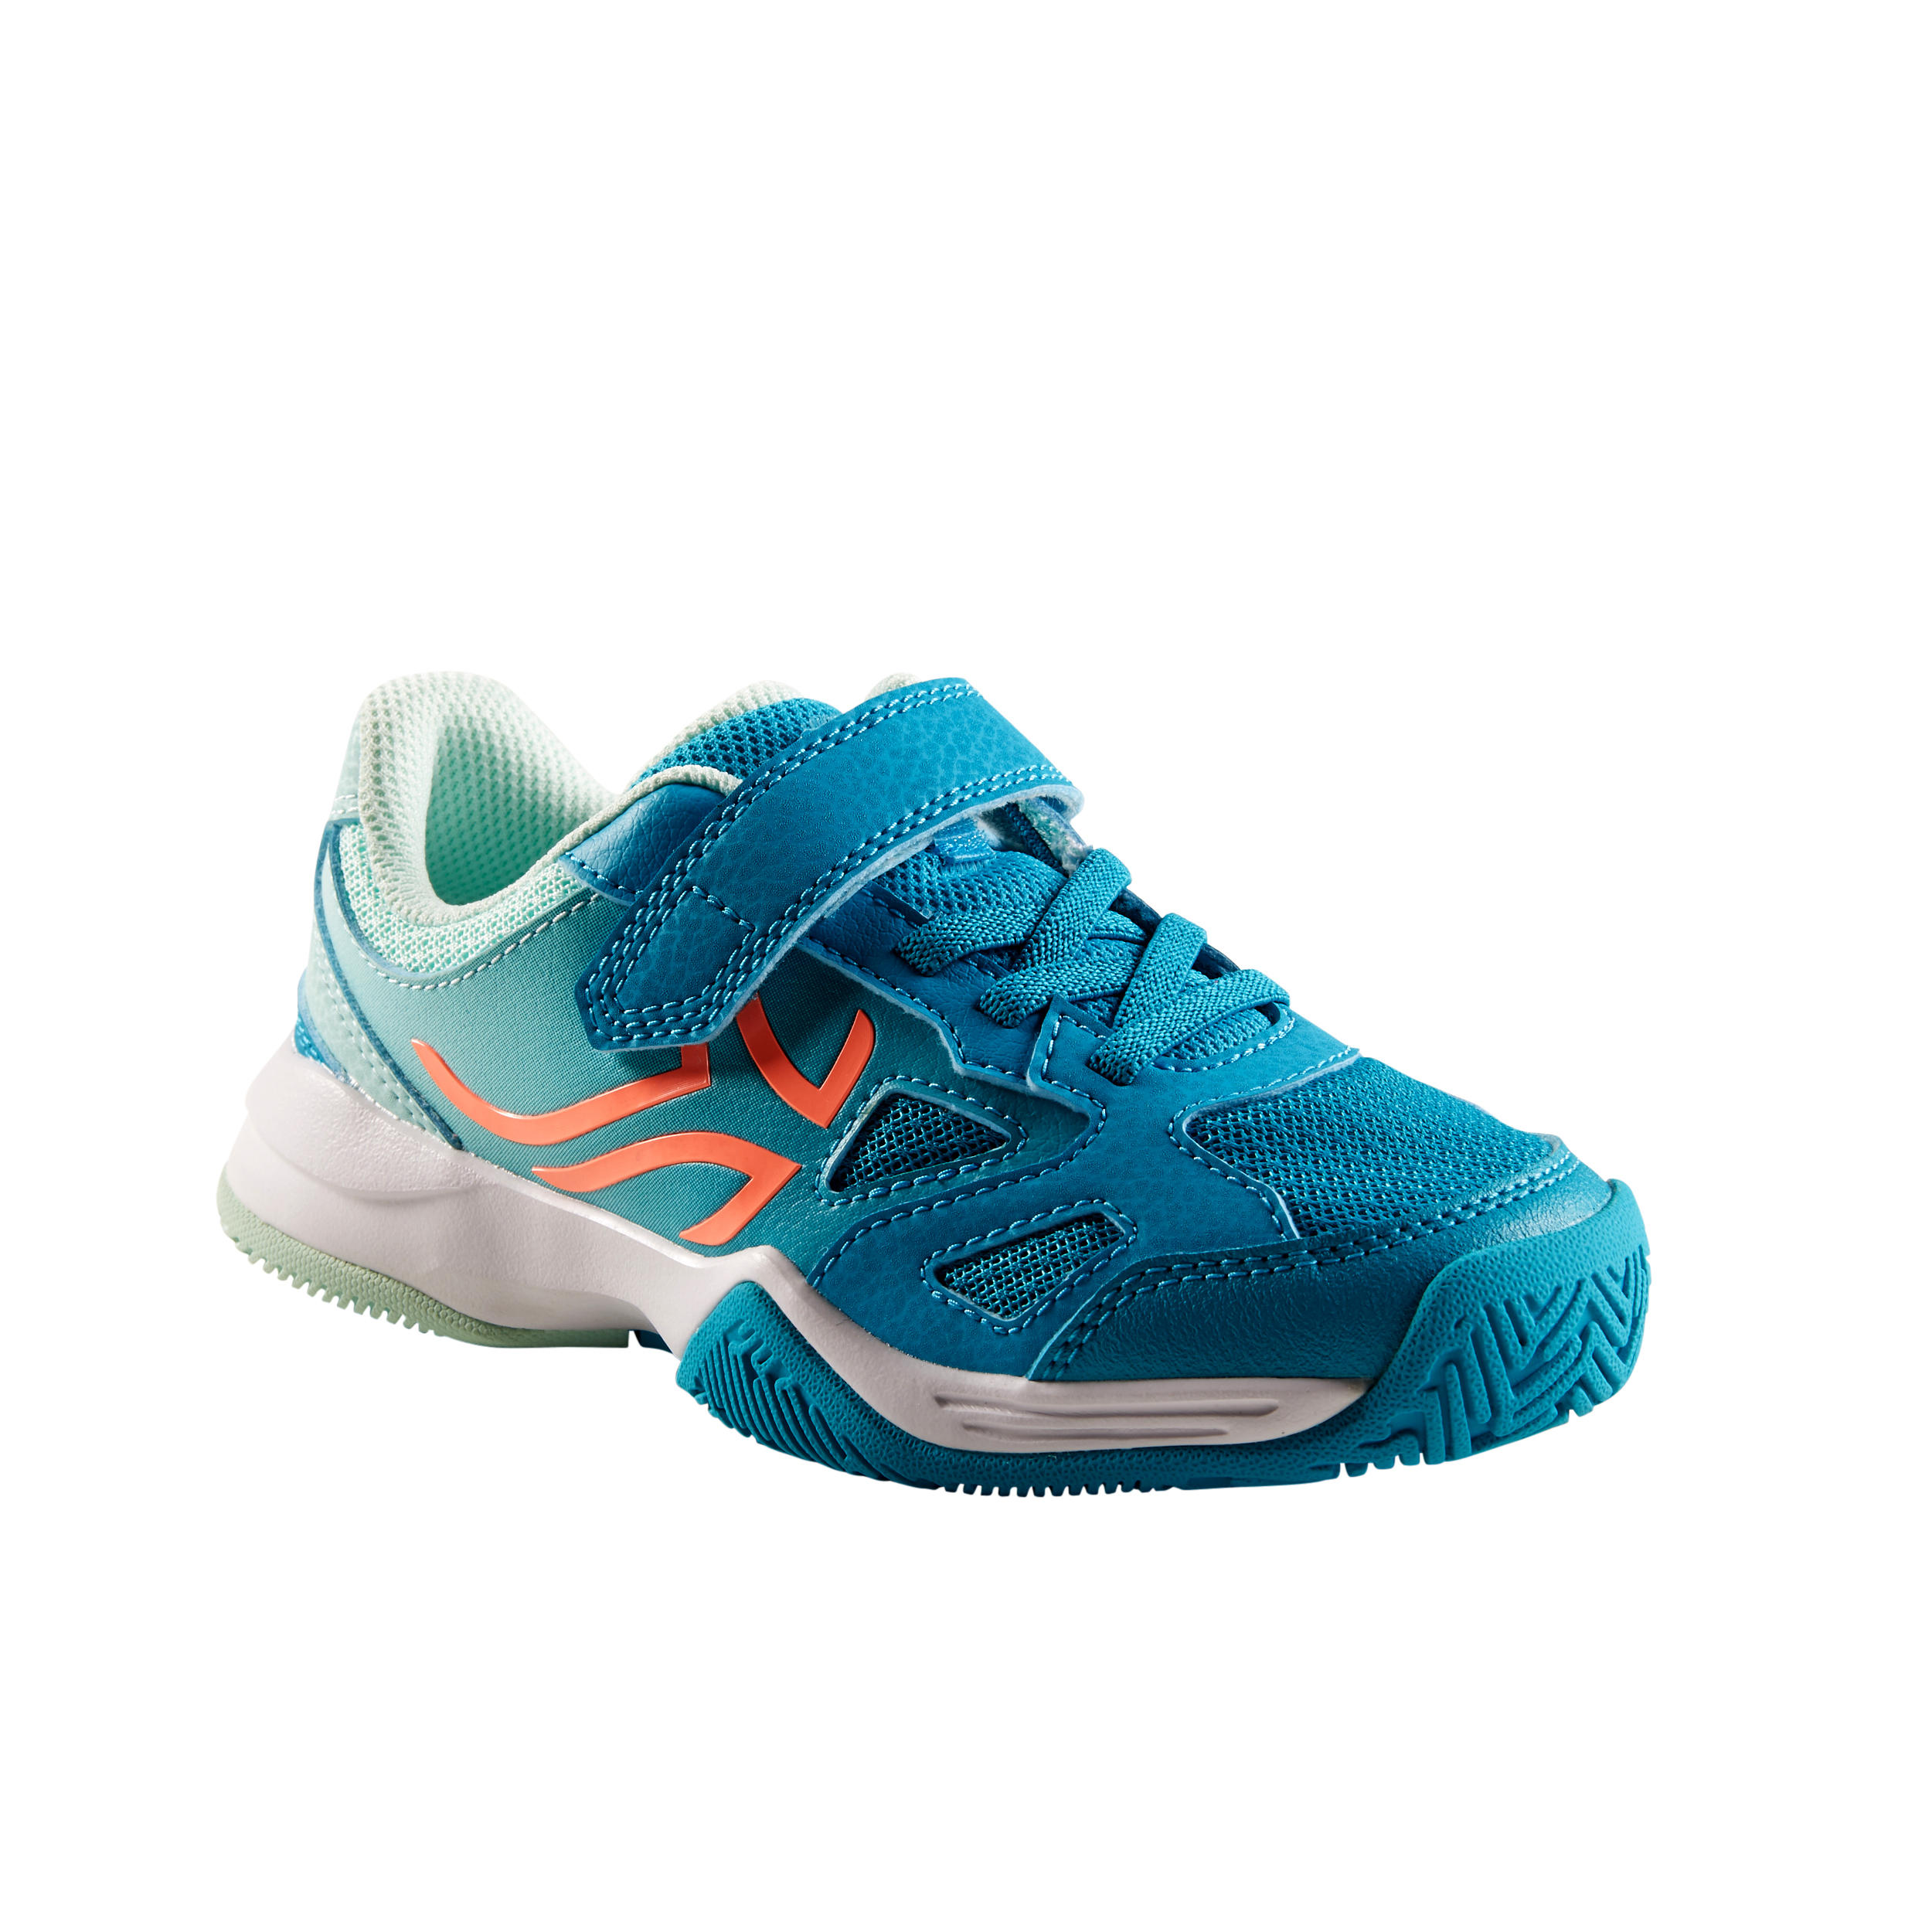 kd turquoise